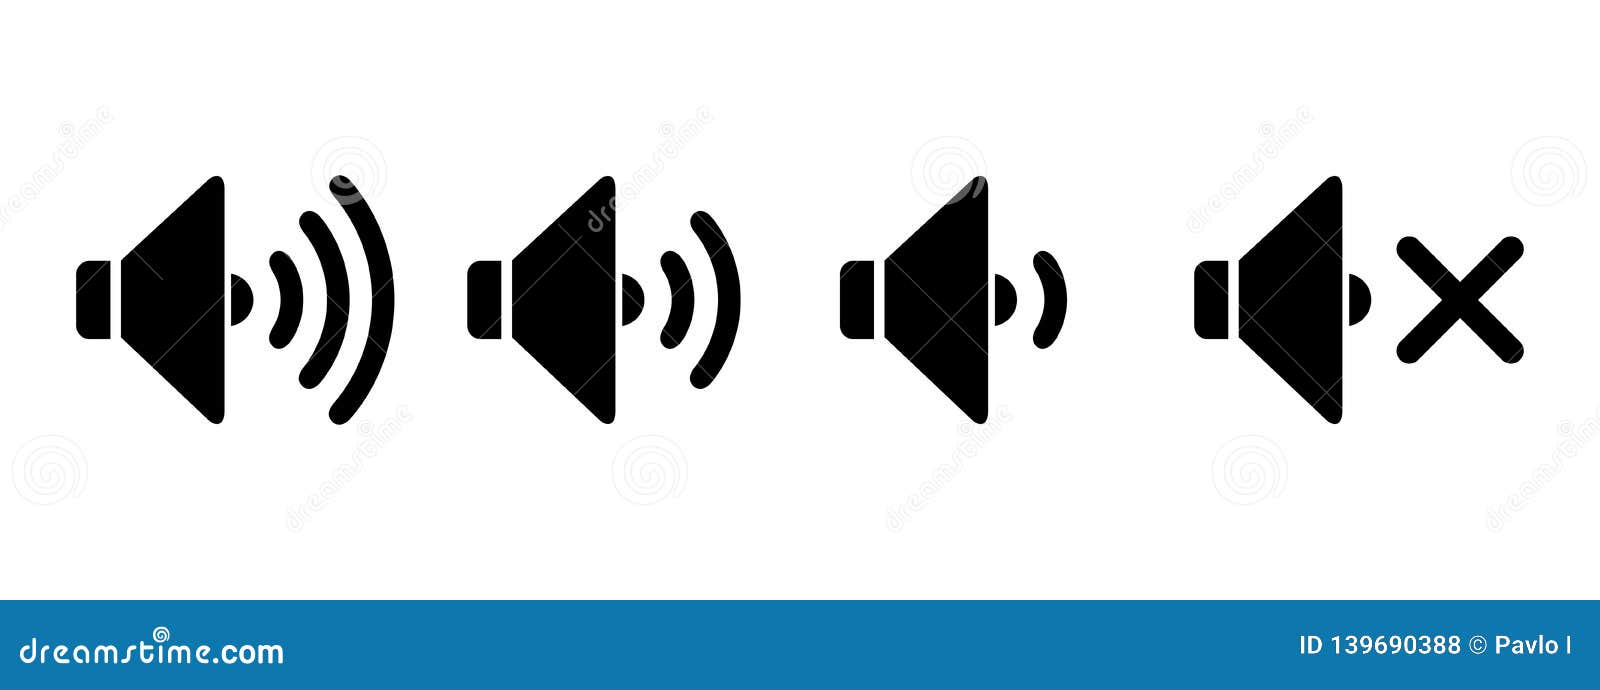 audio speaker volume icon for apps and websites - for stock